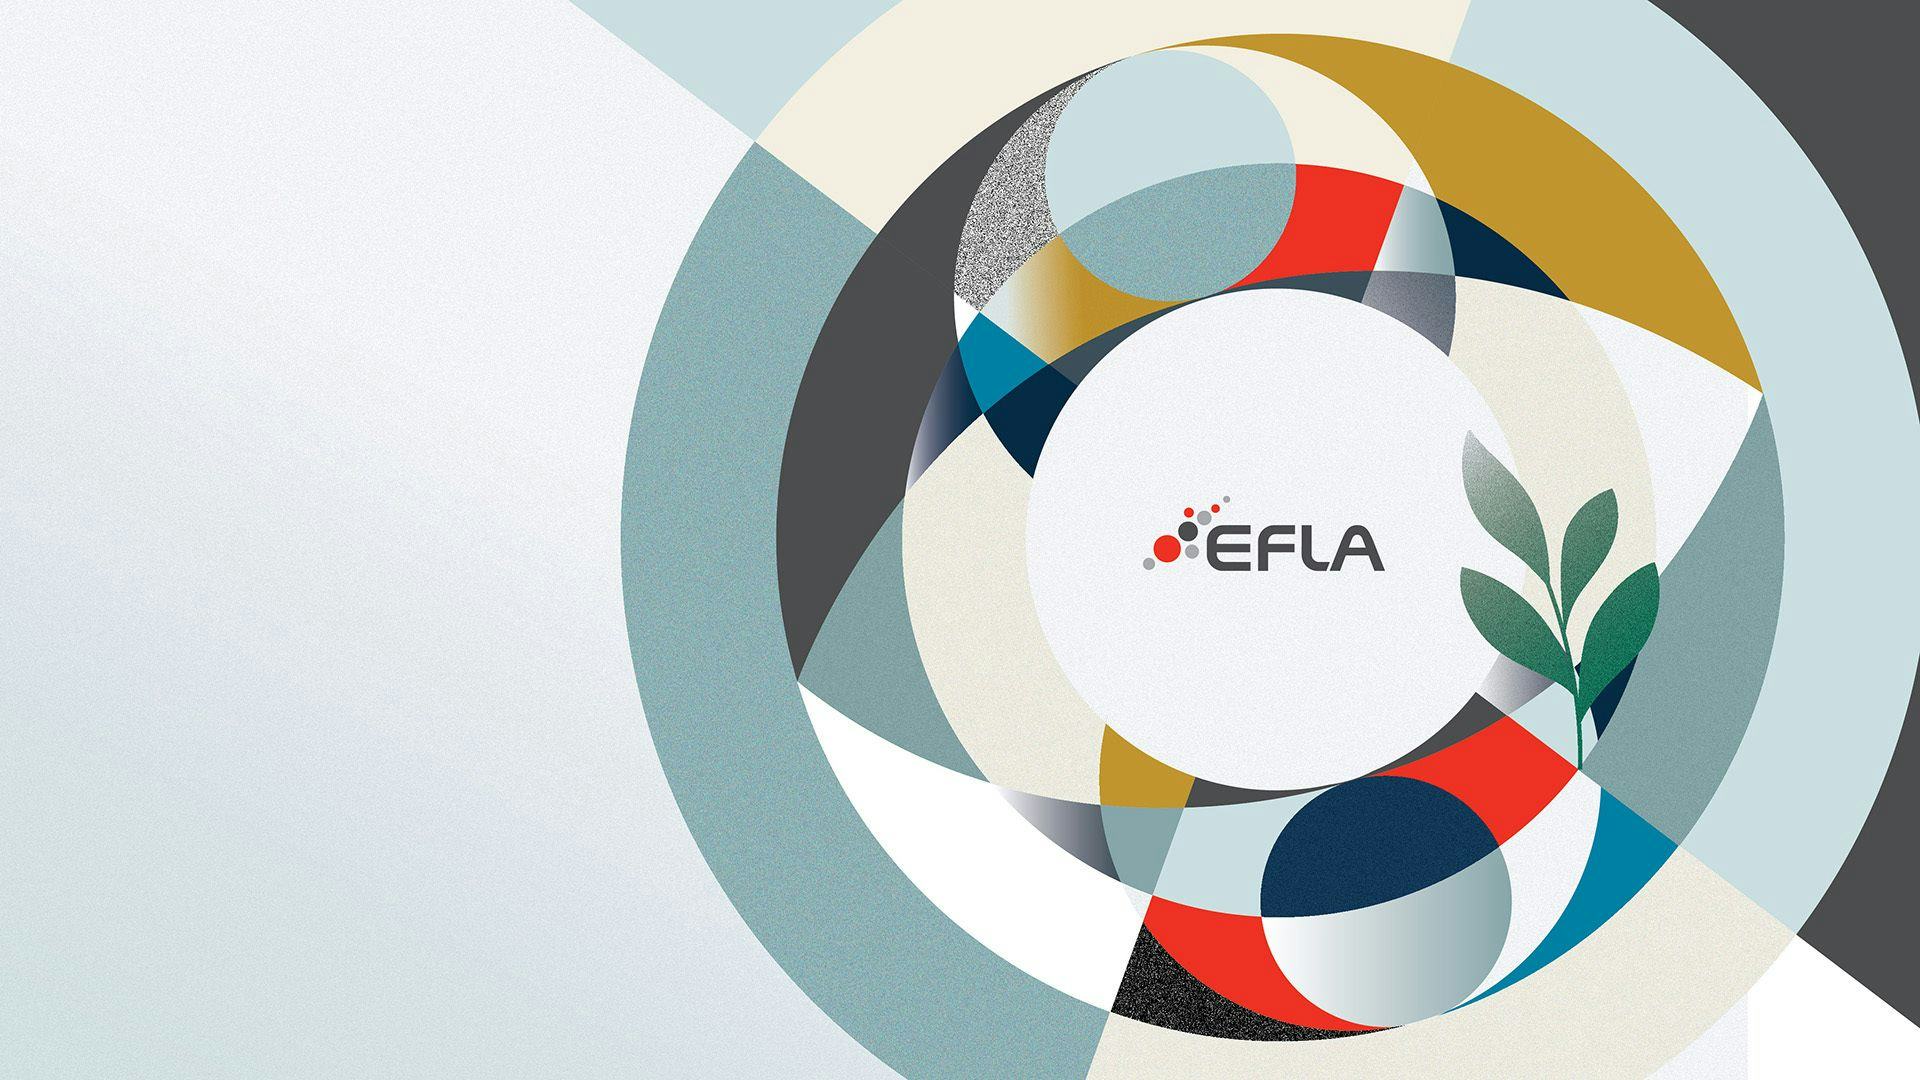 An abstract geometric design with overlapping circles in various colors and the logo of "EFLA"